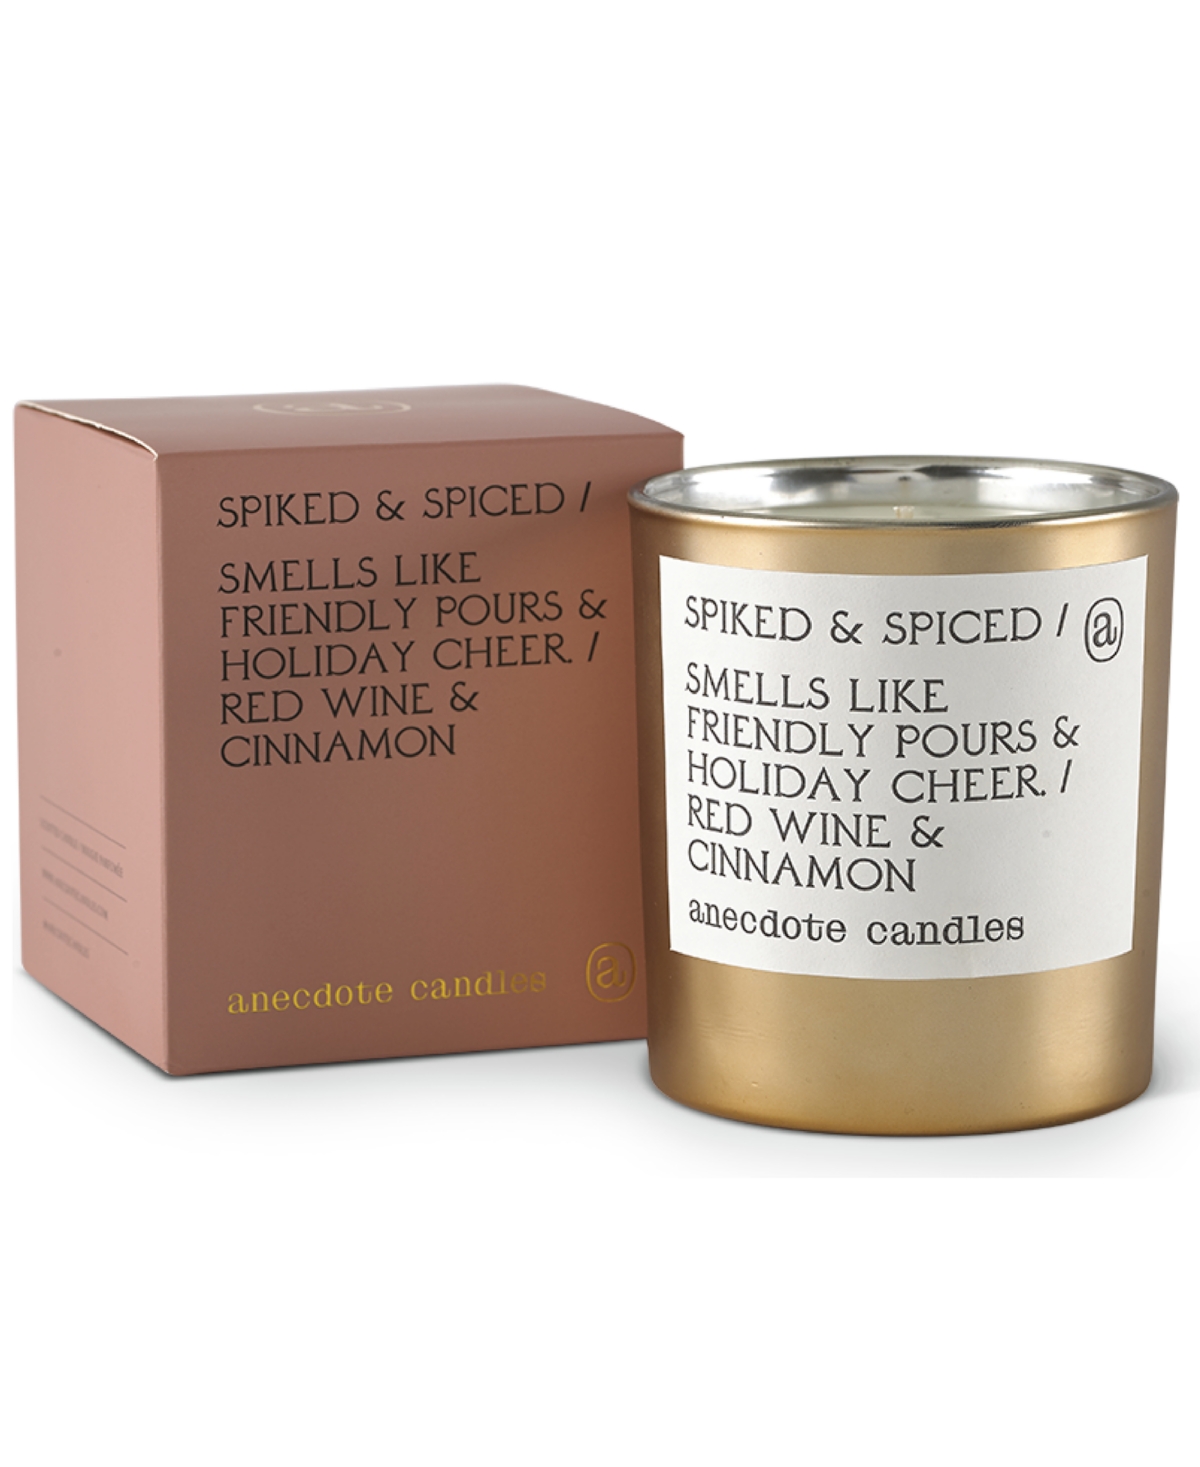 Spiked & Spiced Gold Tumbler Candle, 9-oz. - Spiked  Spiced